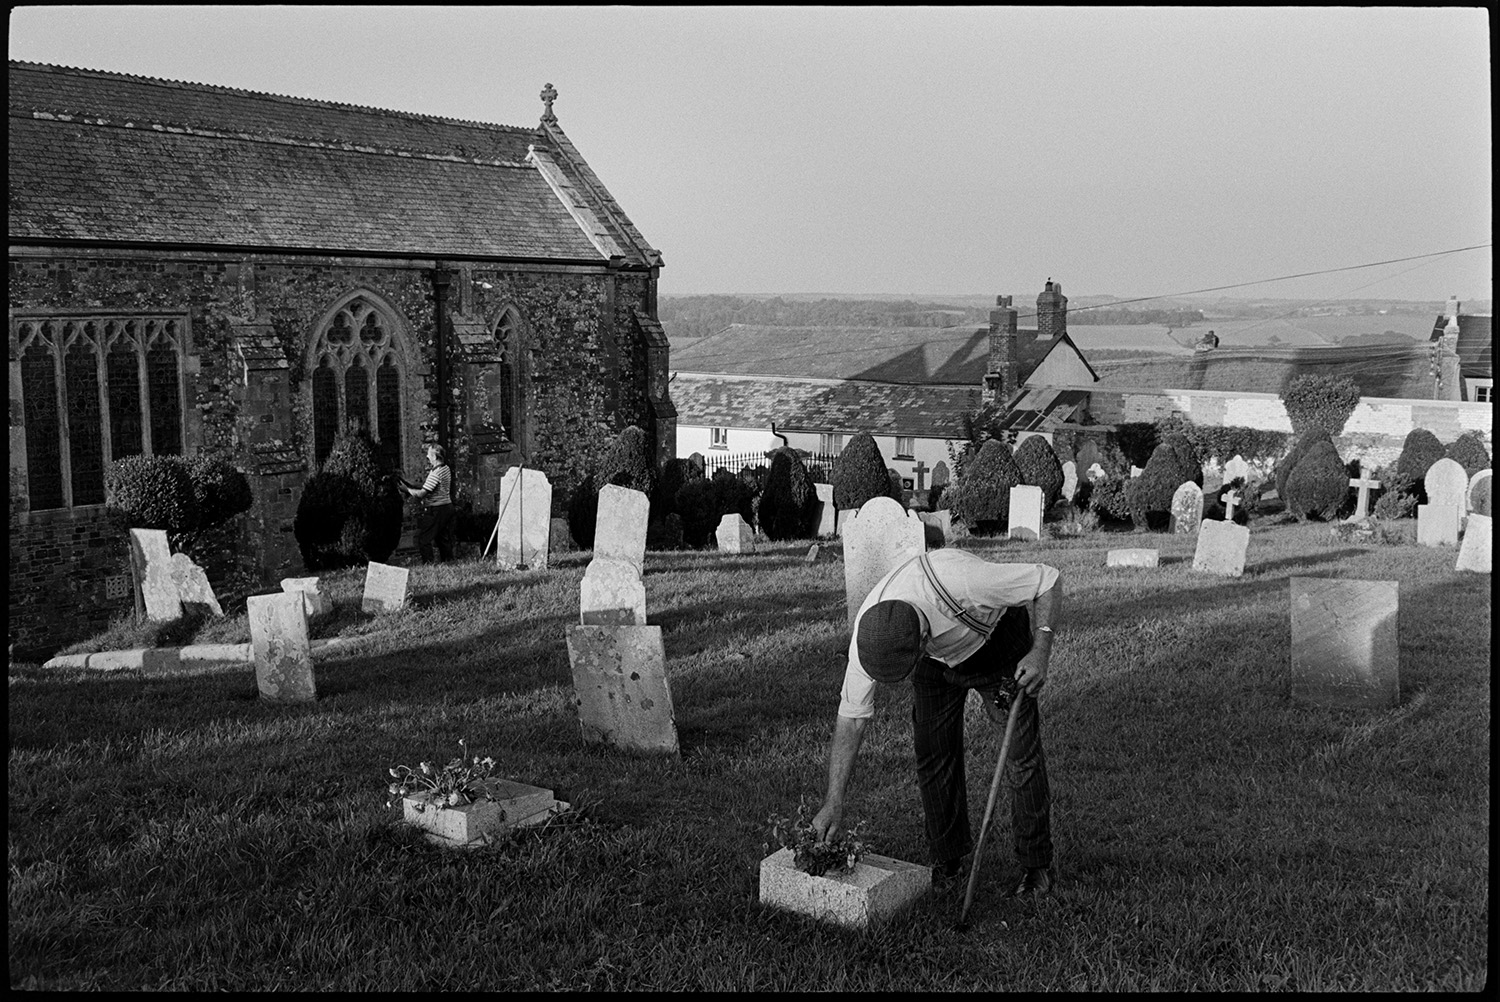 Men working in graveyard, carrying flowers, clipping hedge.
[Men working in Petrockstowe churchyard, tidying gravestones, flowers and clipping hedging. Part of the church is visible and the roofs of village houses can be seen in the background.]